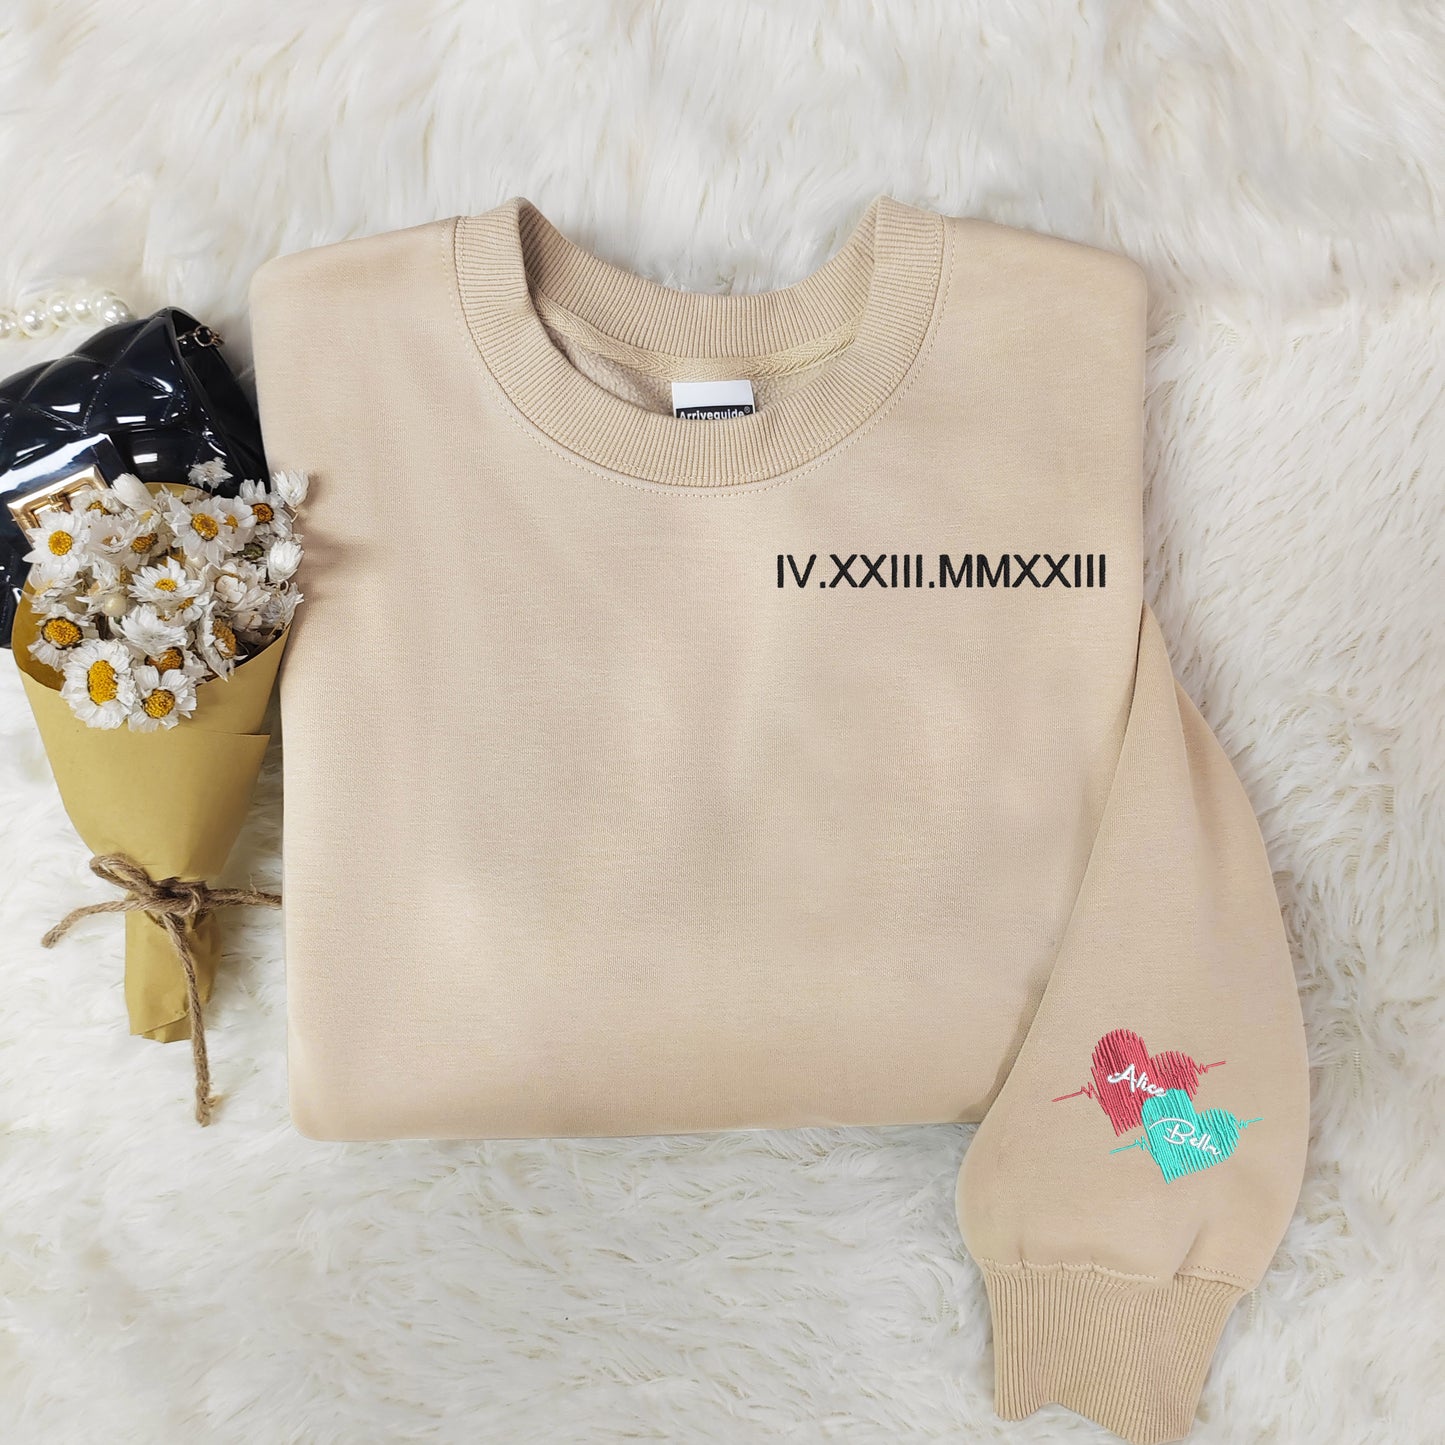 Customized Roman numeral embroidered sweatshirts for couples, with the couple’s names embroidered on the cuffs.